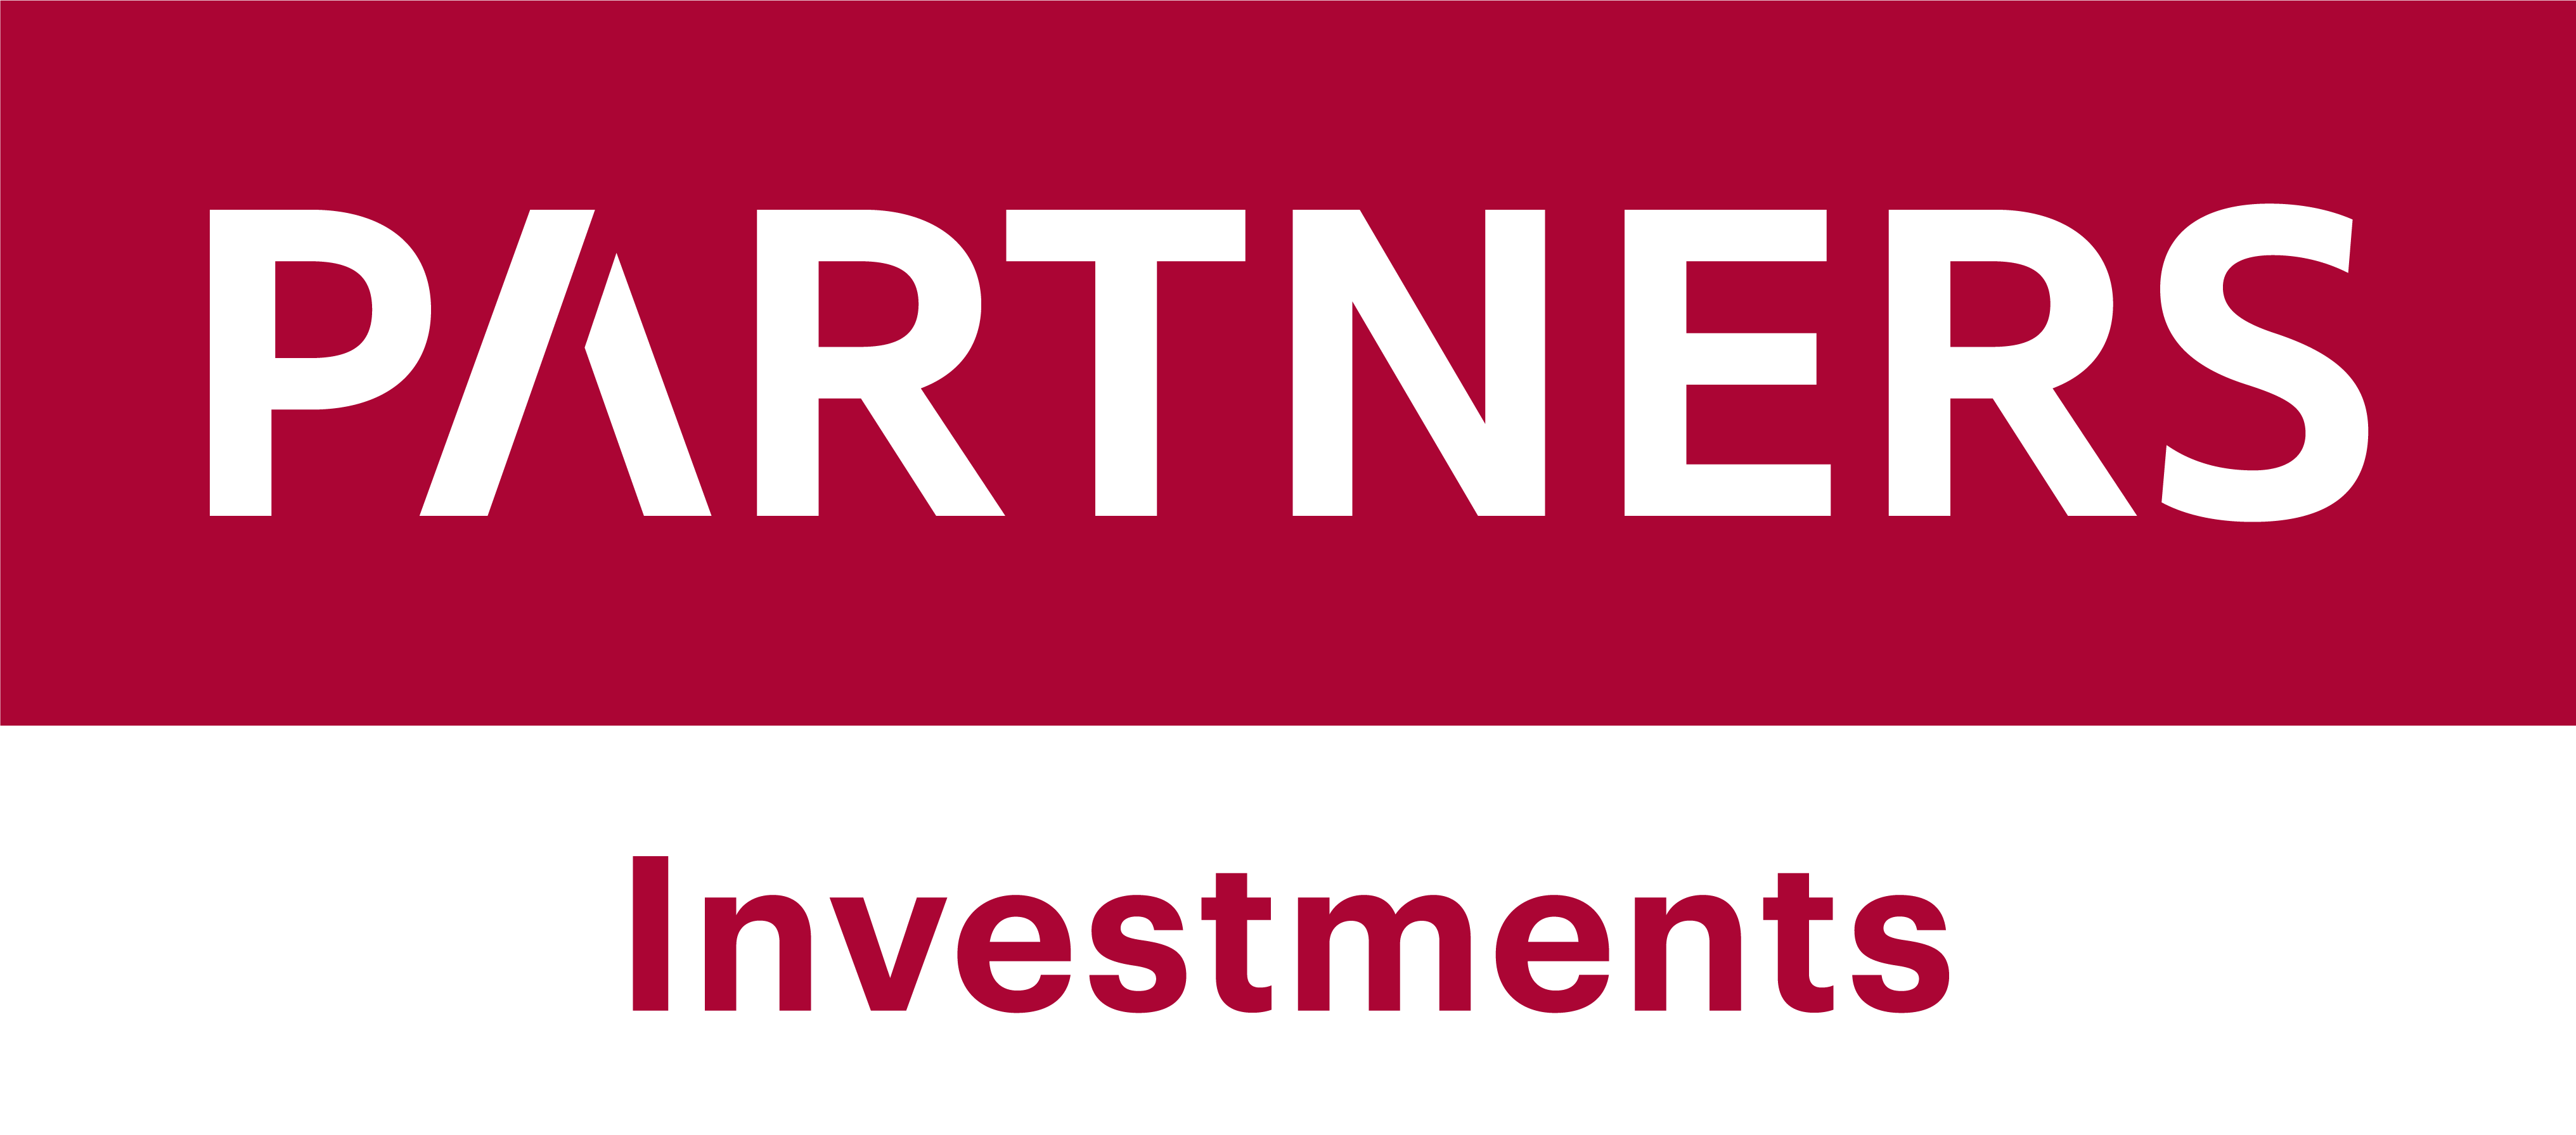 Partners Investments